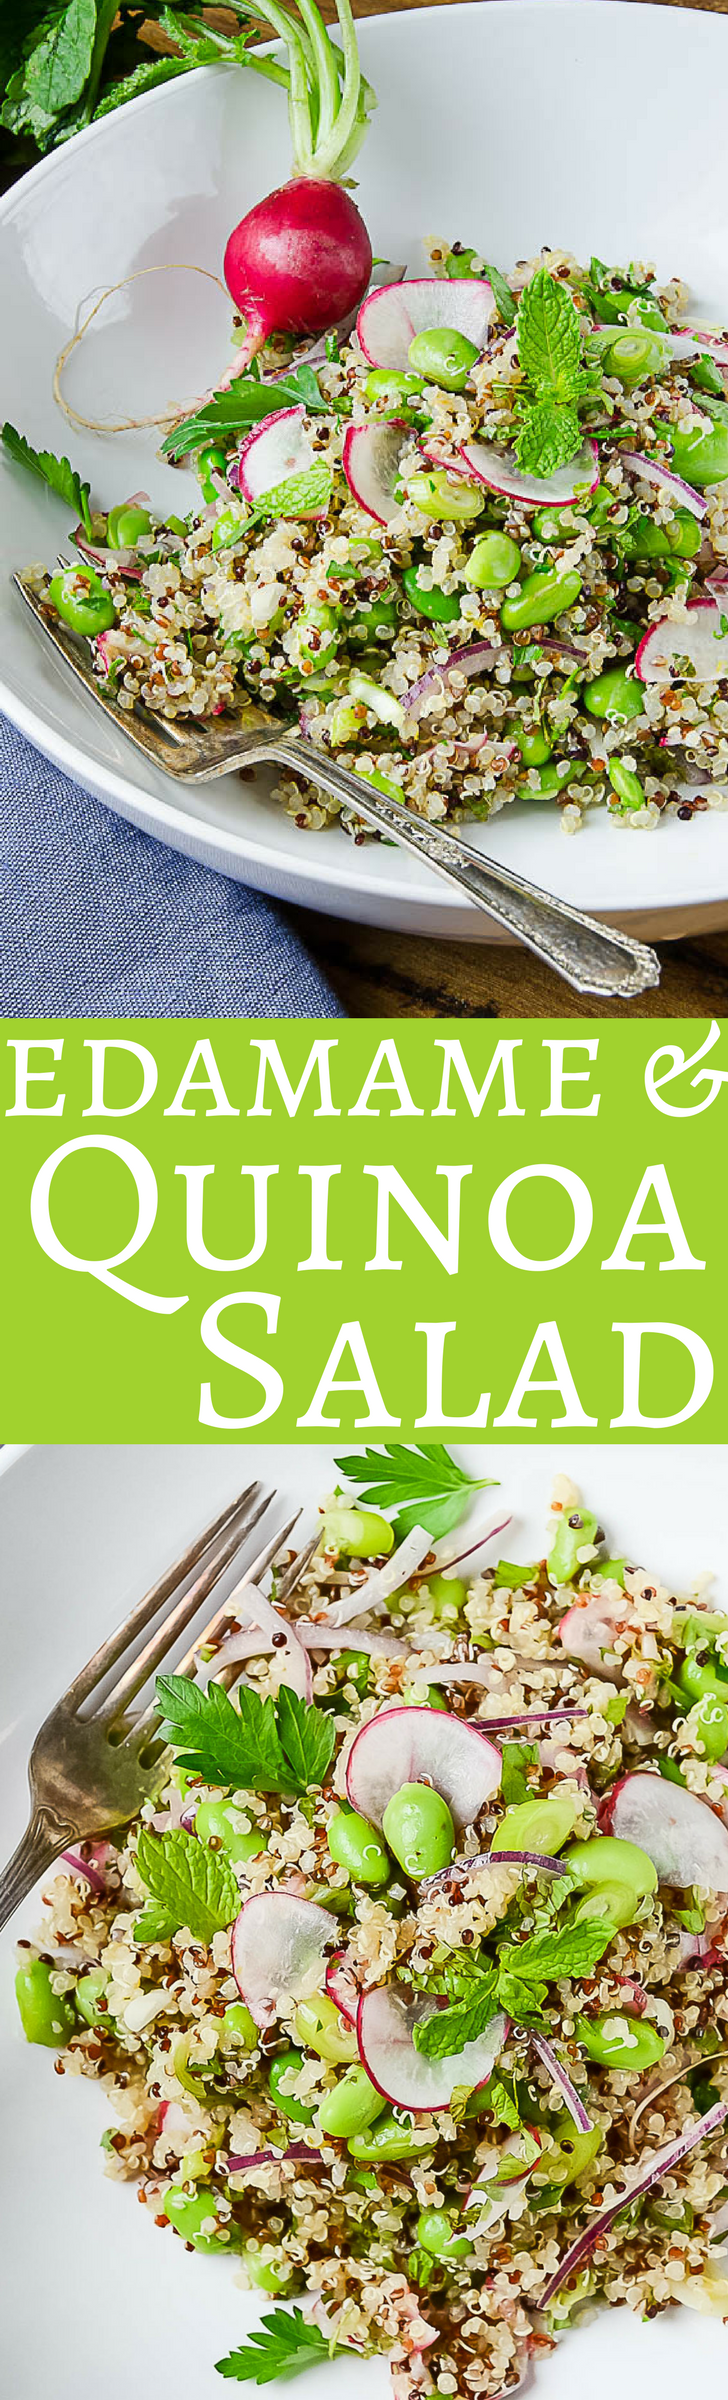 Here's an easy, healthy quinoa salad recipe! With edamame, radishes and fresh herbs, it's a great Spring or Summer side dish or vegan main!